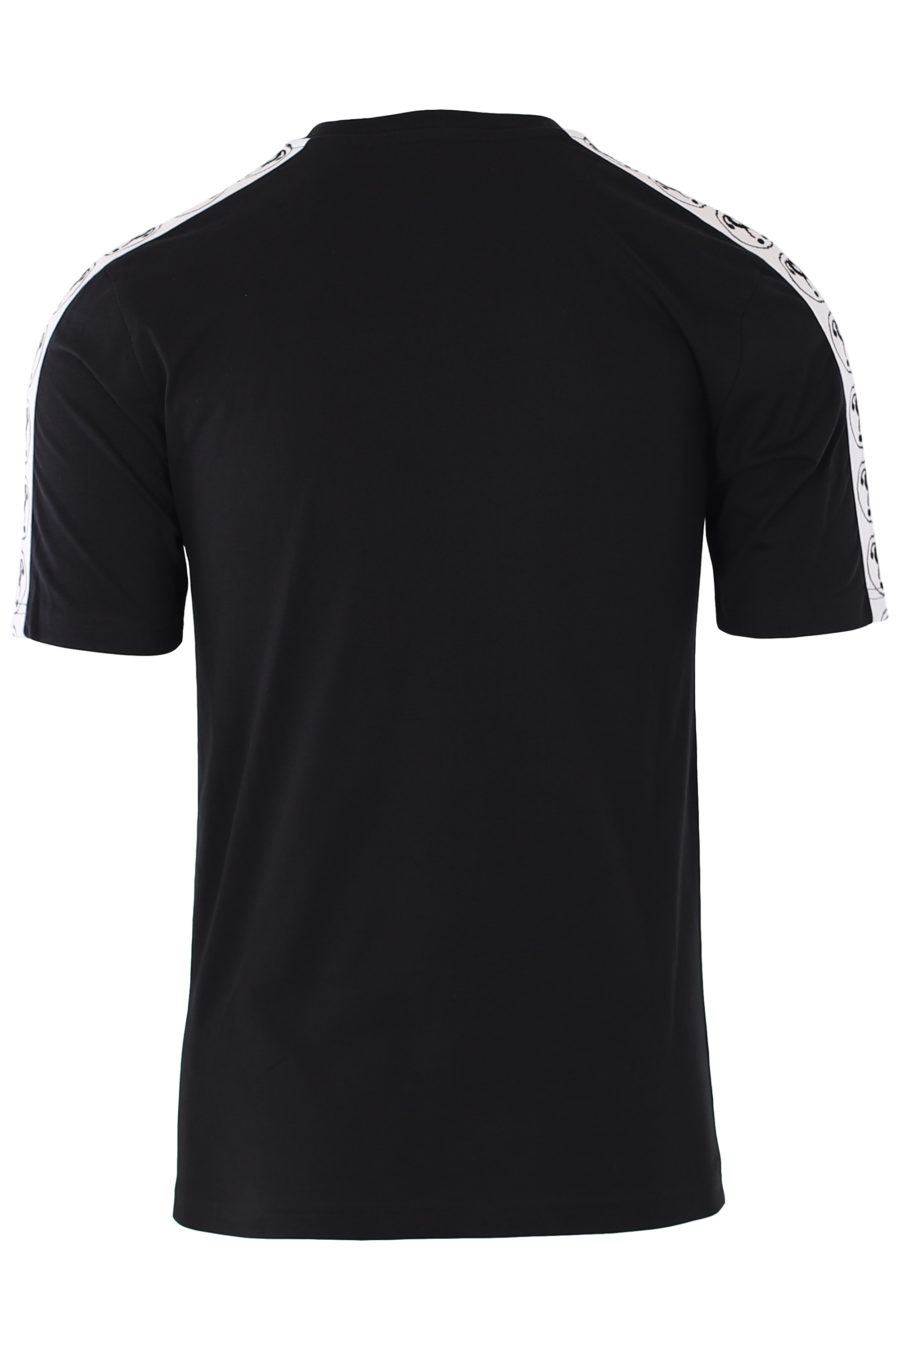 Black T-shirt with small double question logo and tape on sleeves - IMG 9335